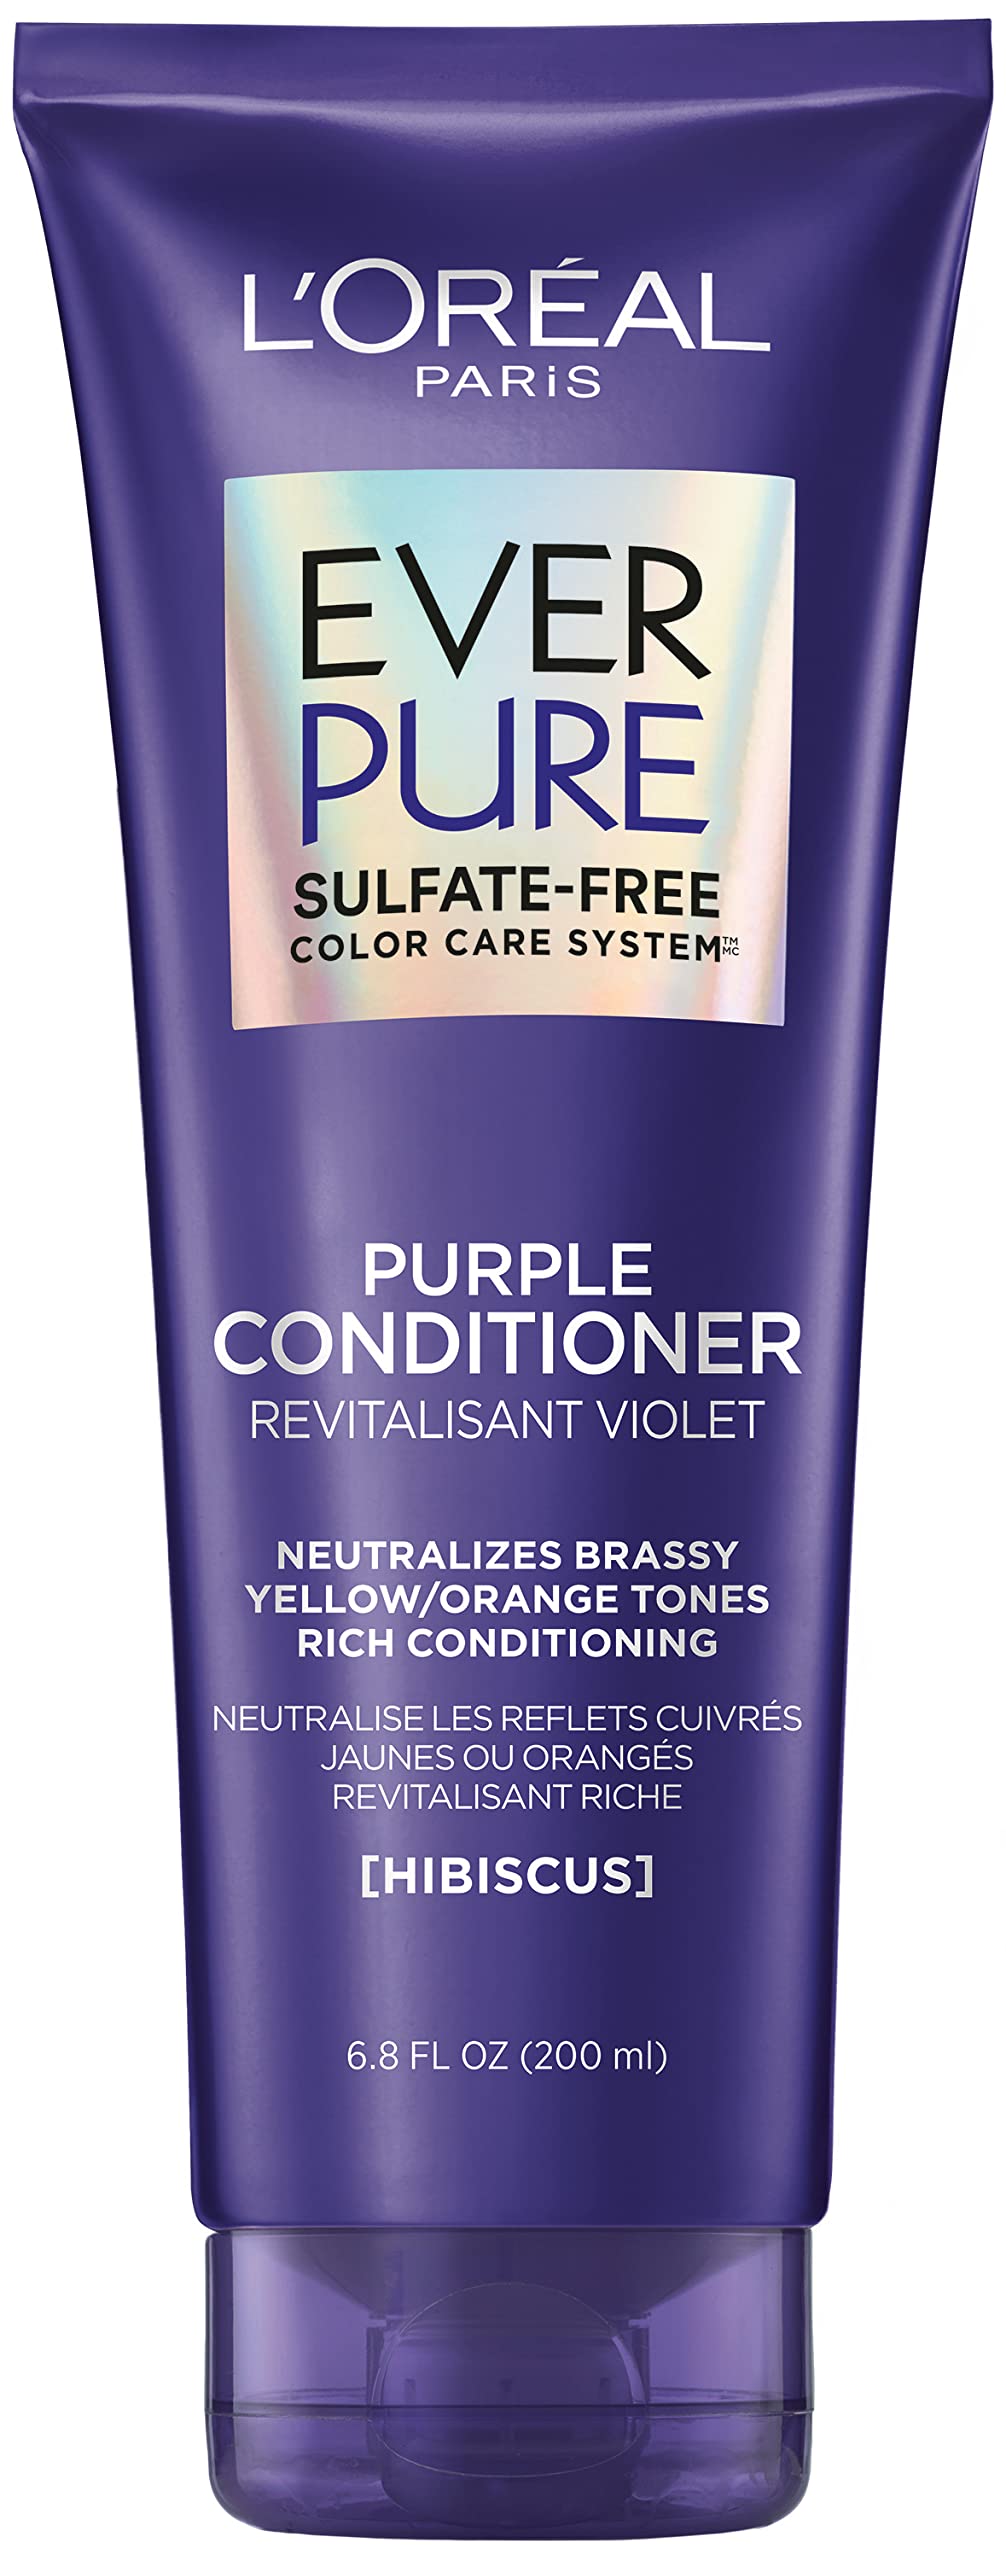 L'Oreal Paris Hair Care EverPure Sulfate Free Brass Toning Purple Conditioner for Blonde, Bleached, Silver, or Brown Highlighted Hair, 6.8 Fl. Oz.